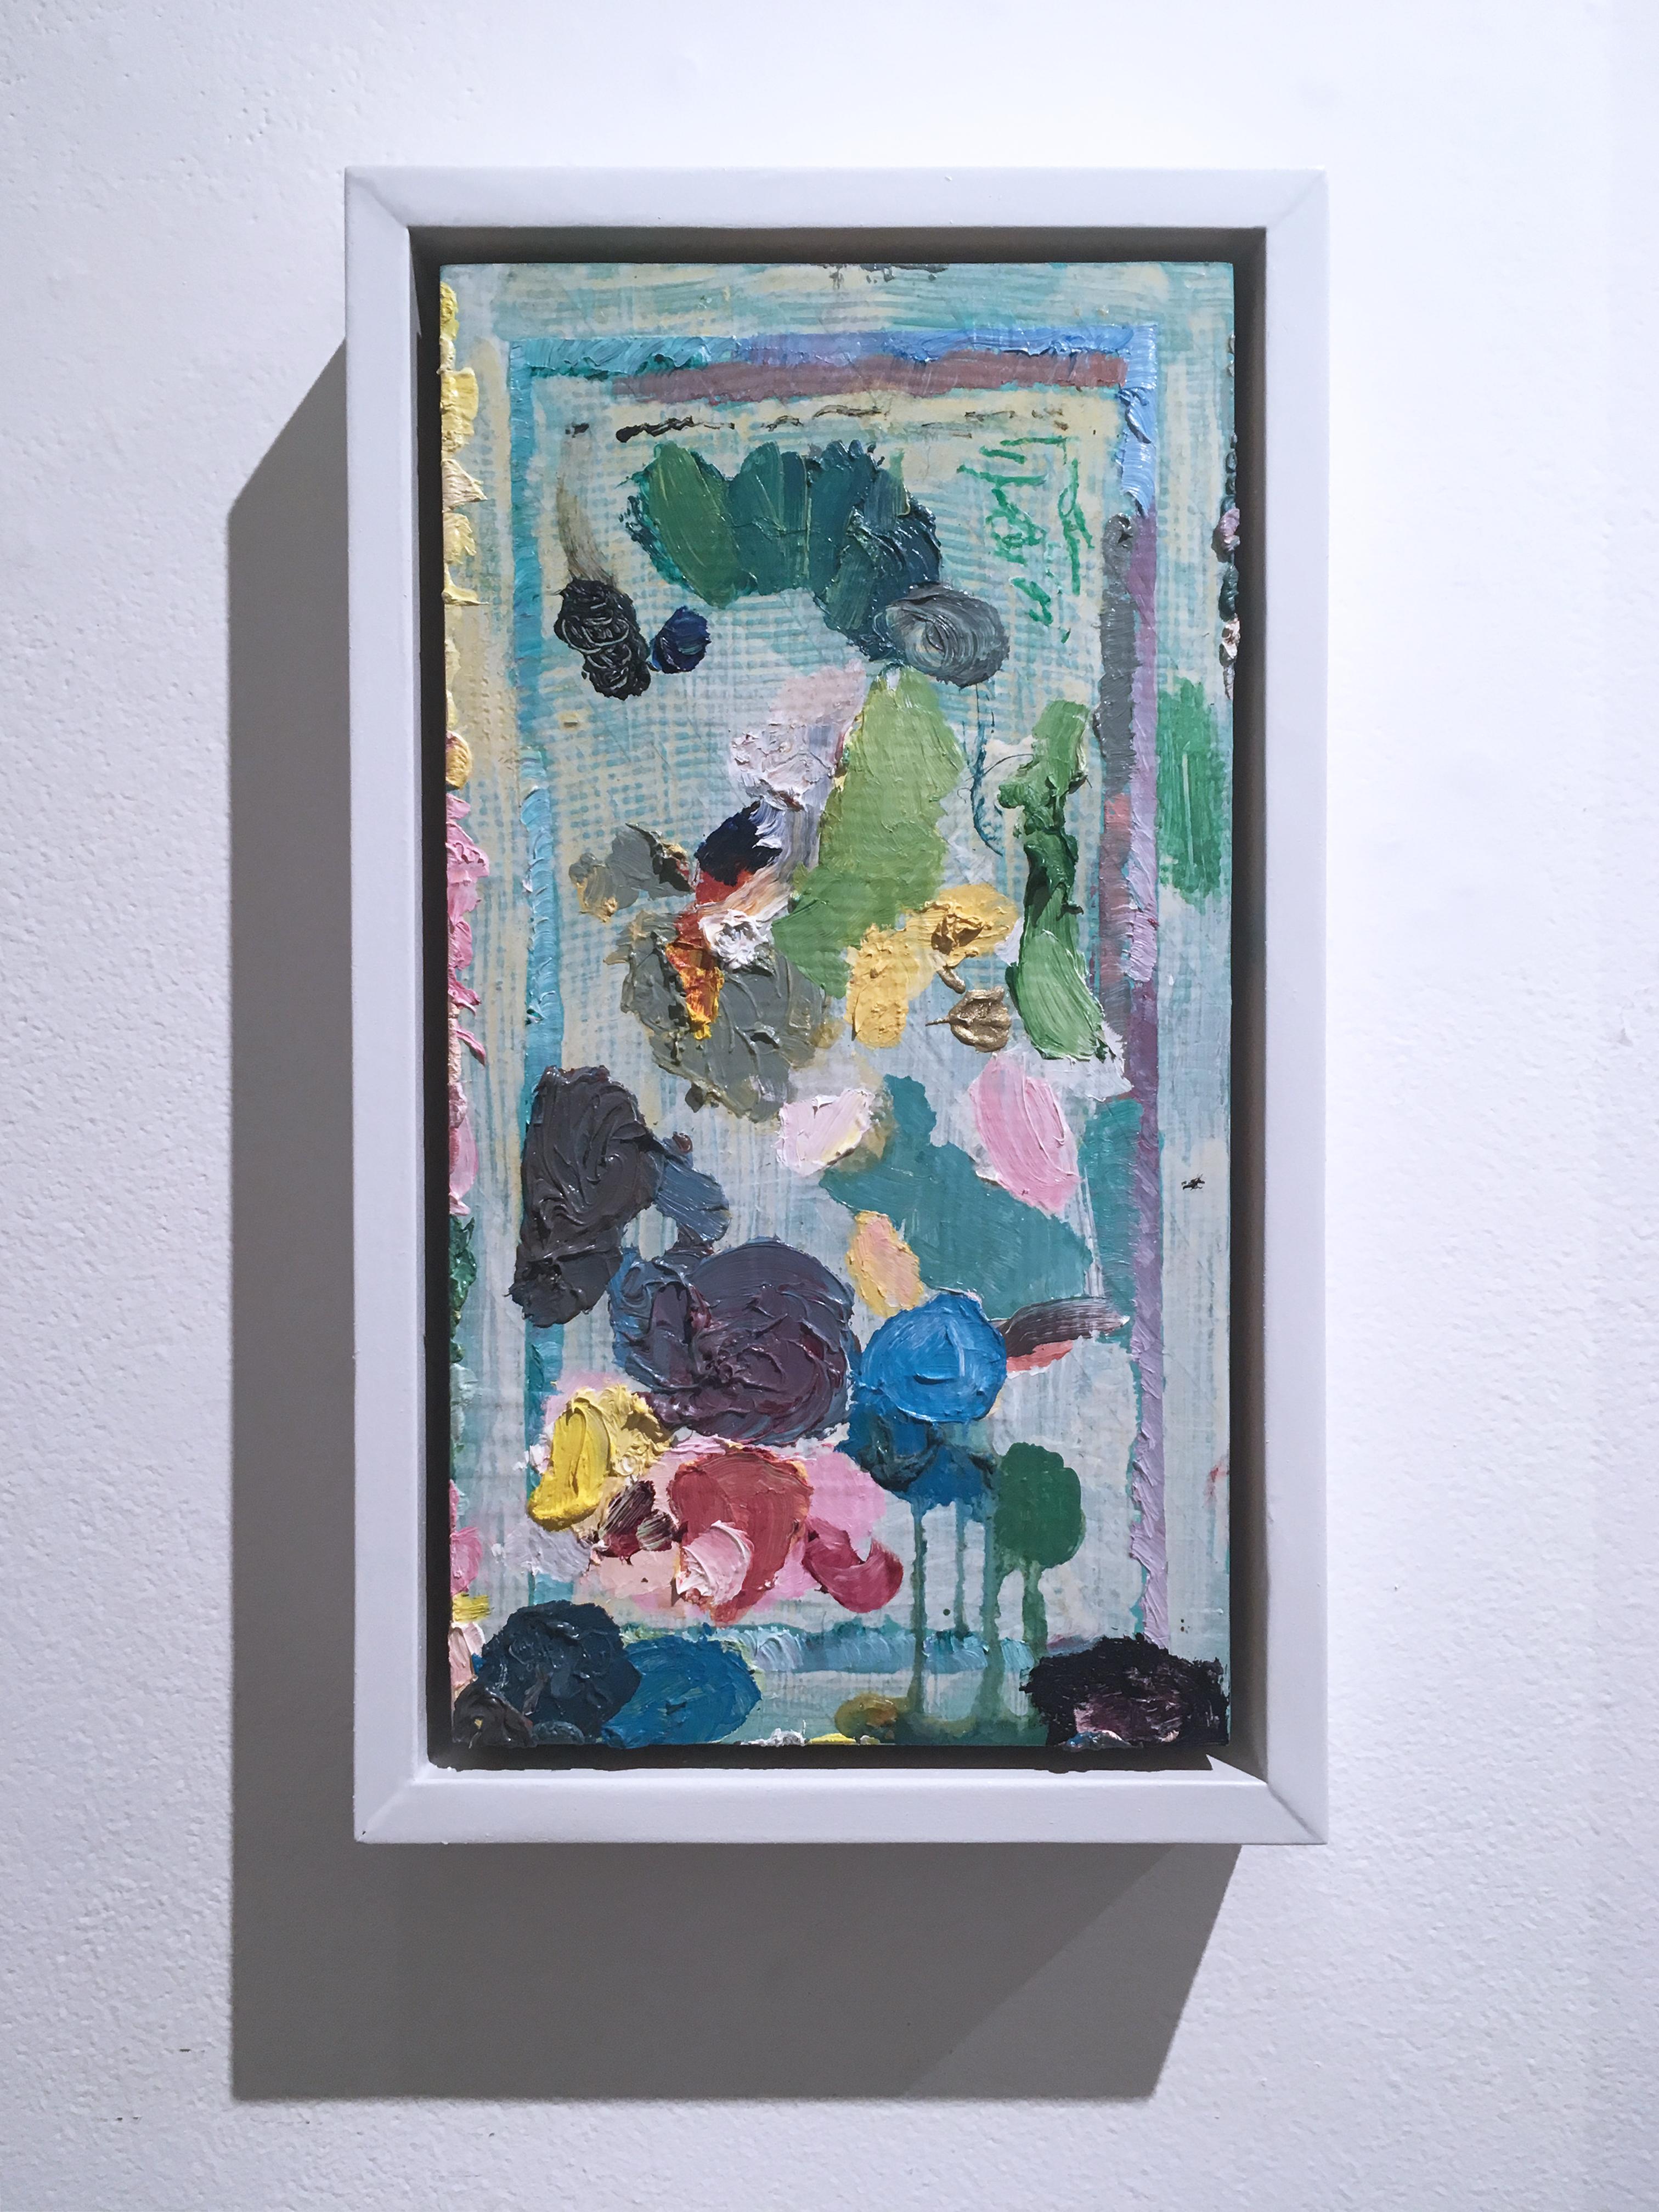 Just A Mess, 2018, acrylic, oil, pastel, panel, green, pink, abstract, frame - Painting by Macauley Norman